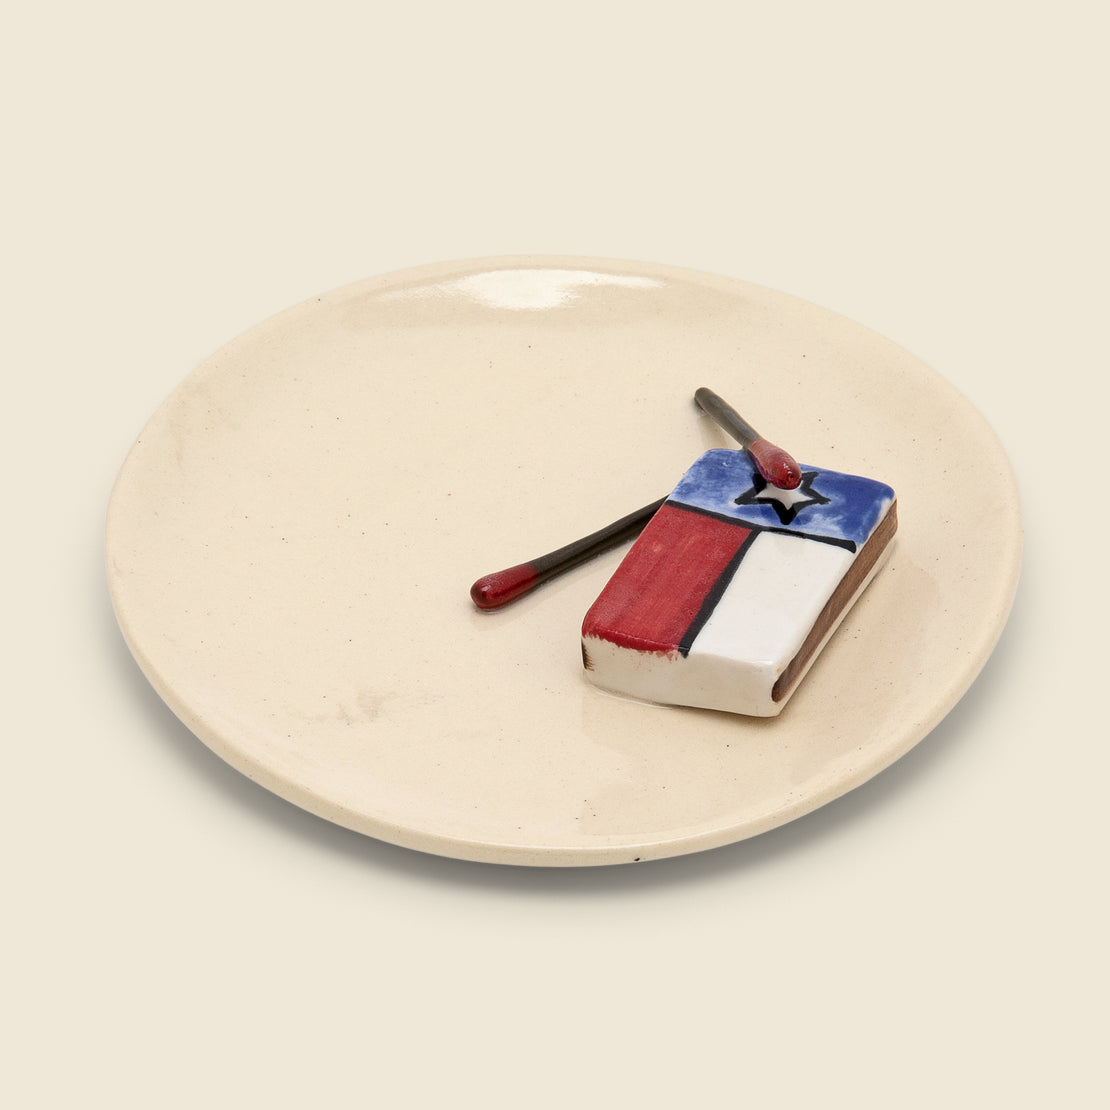 Small Plate - Texas Flag Matches